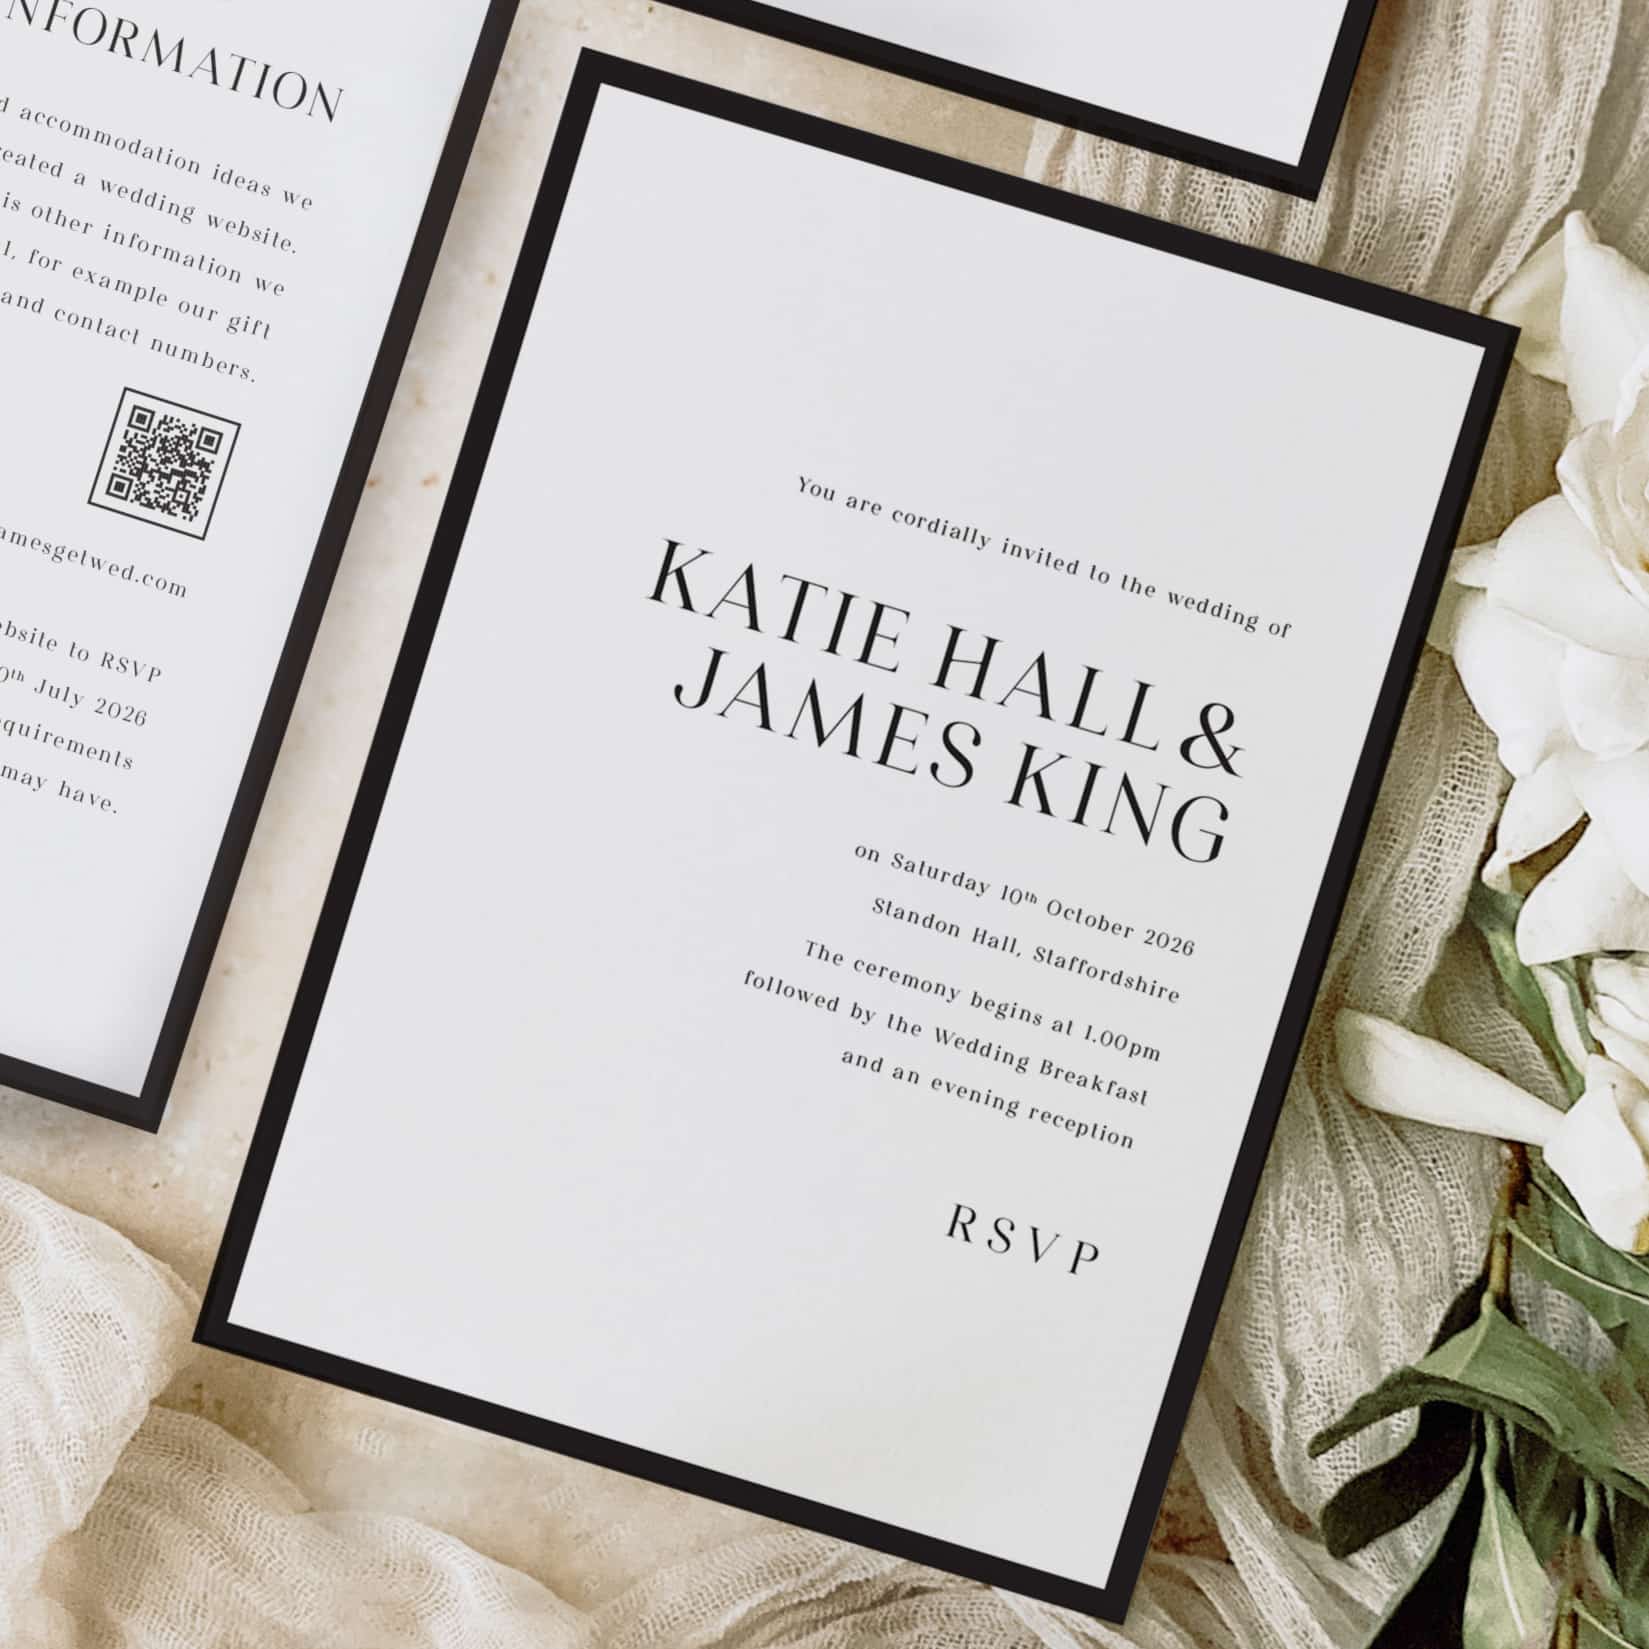 showing modern wedding stationery collection, boredr. it's a black and white wedding stationery design, with striking black font. it's a white card on a pale linen background